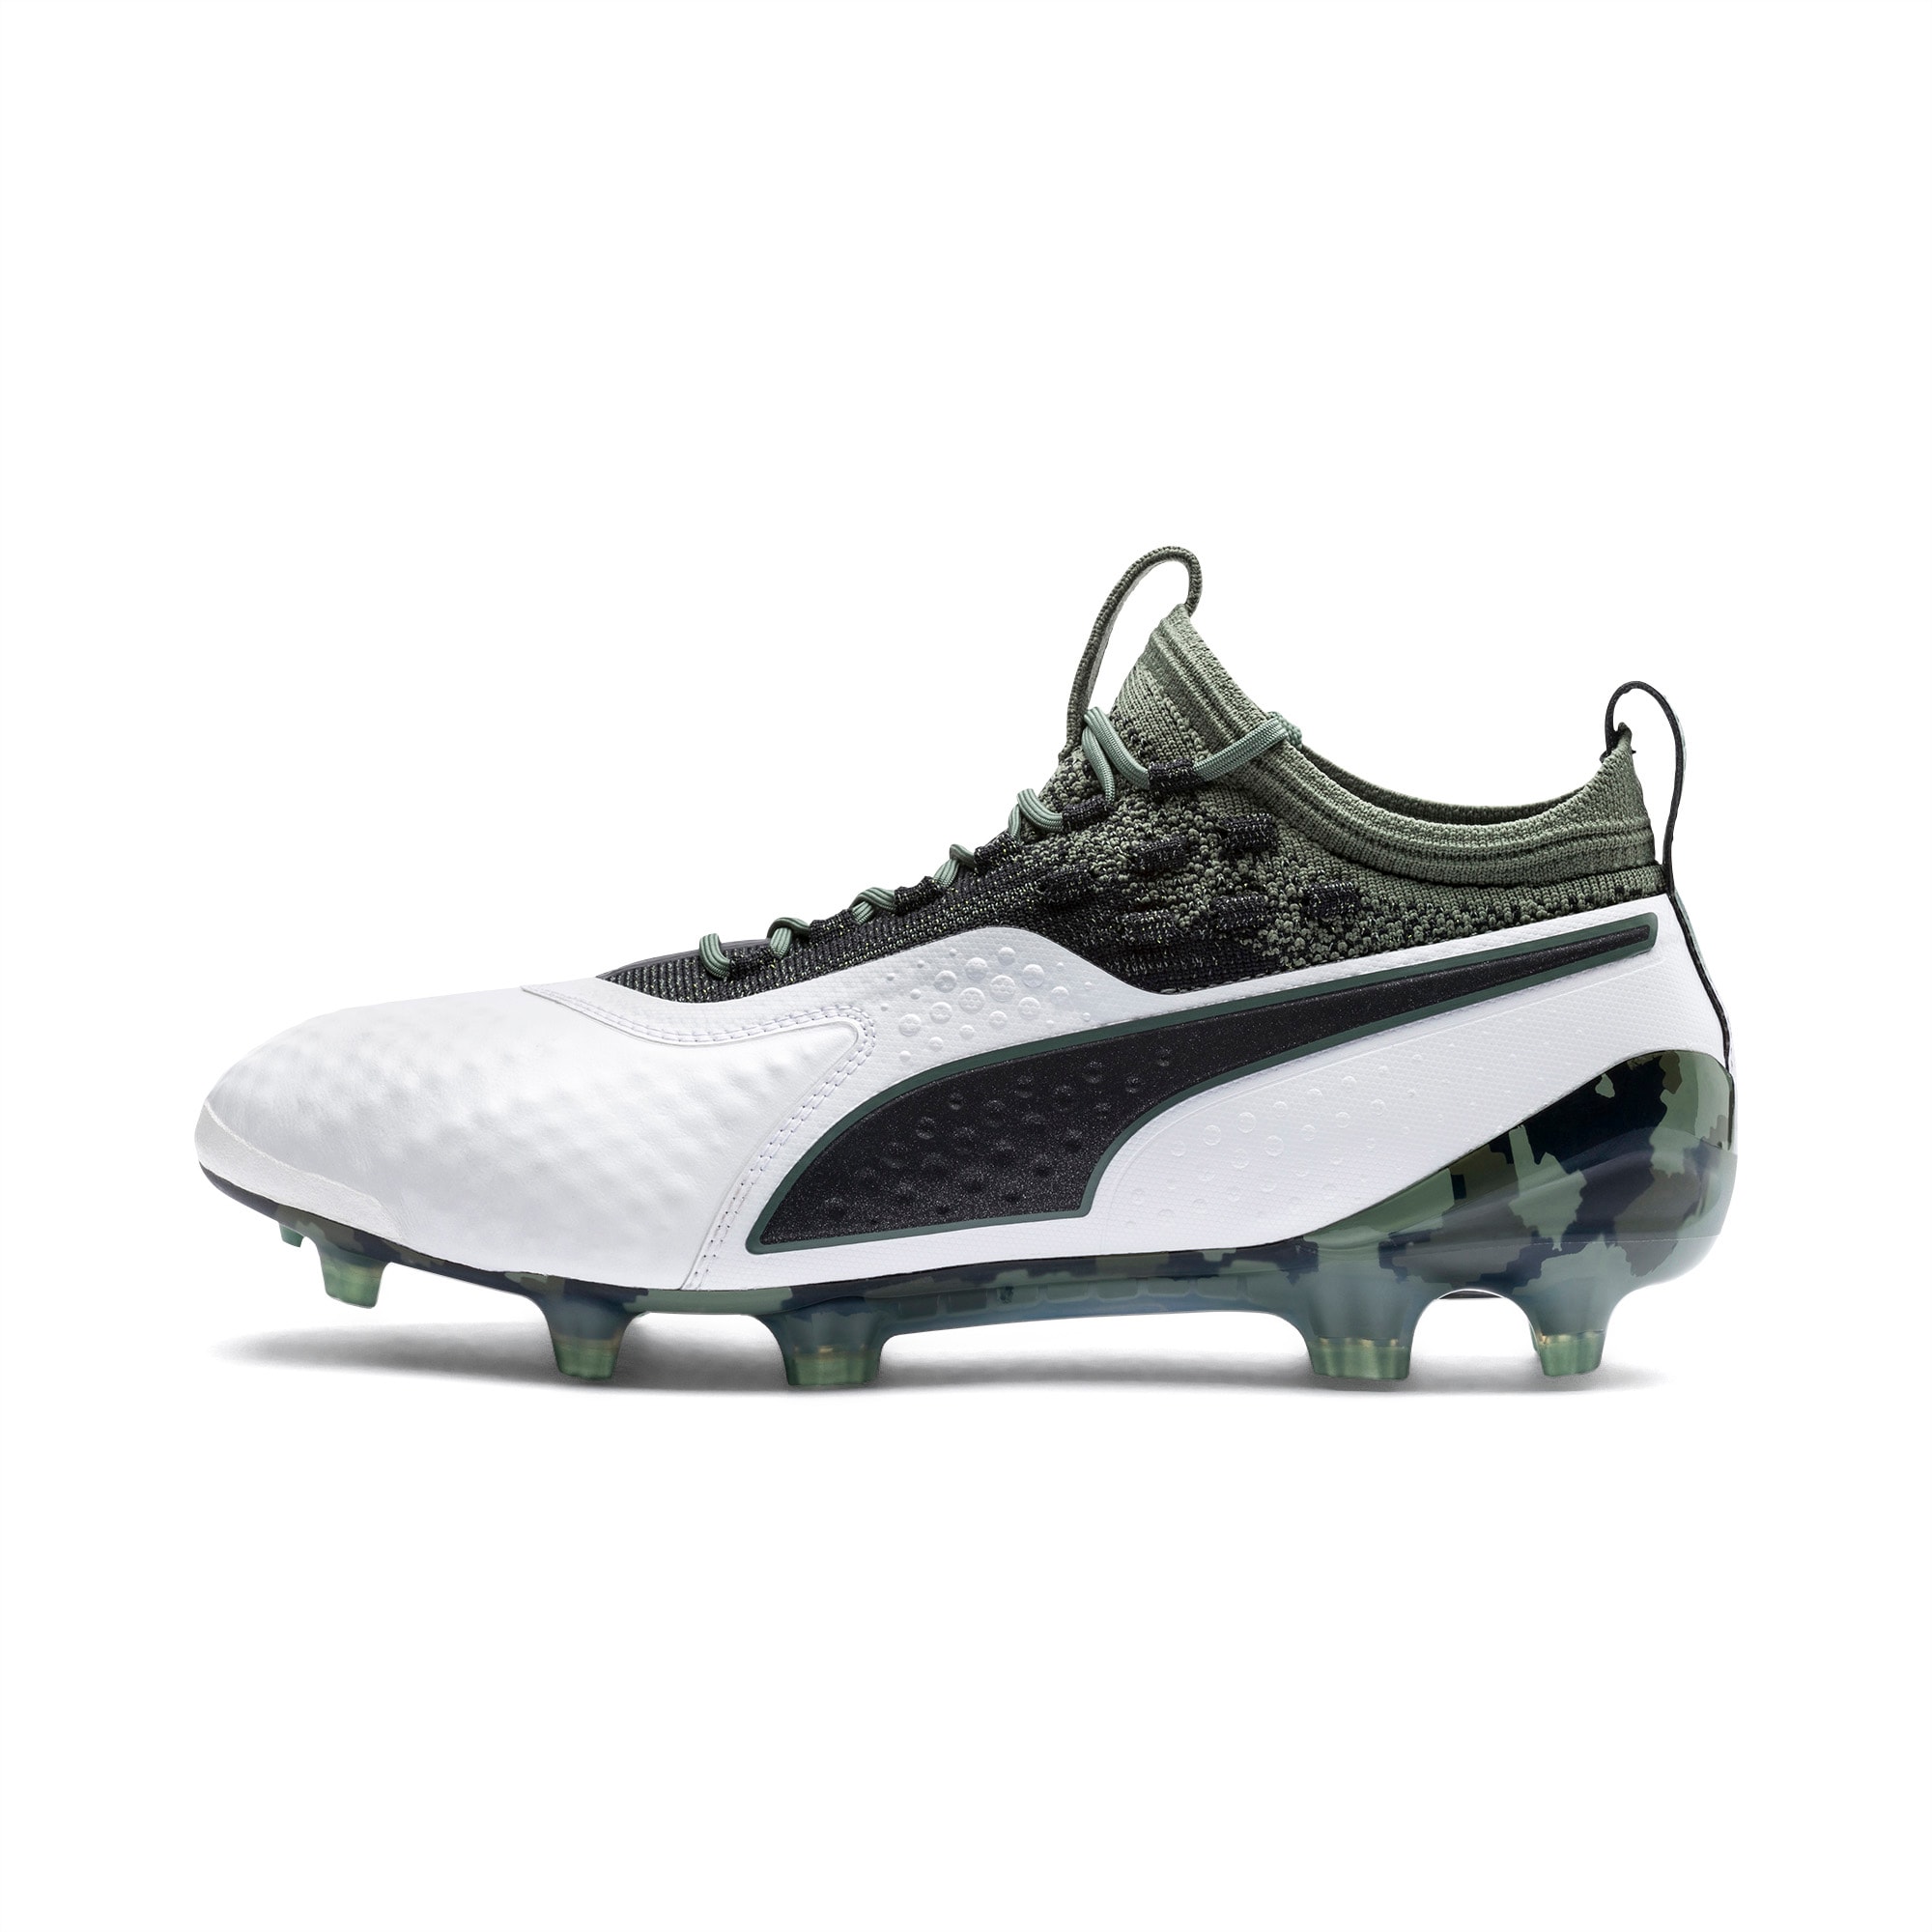 Leather FG/AG Men's Football Boots 